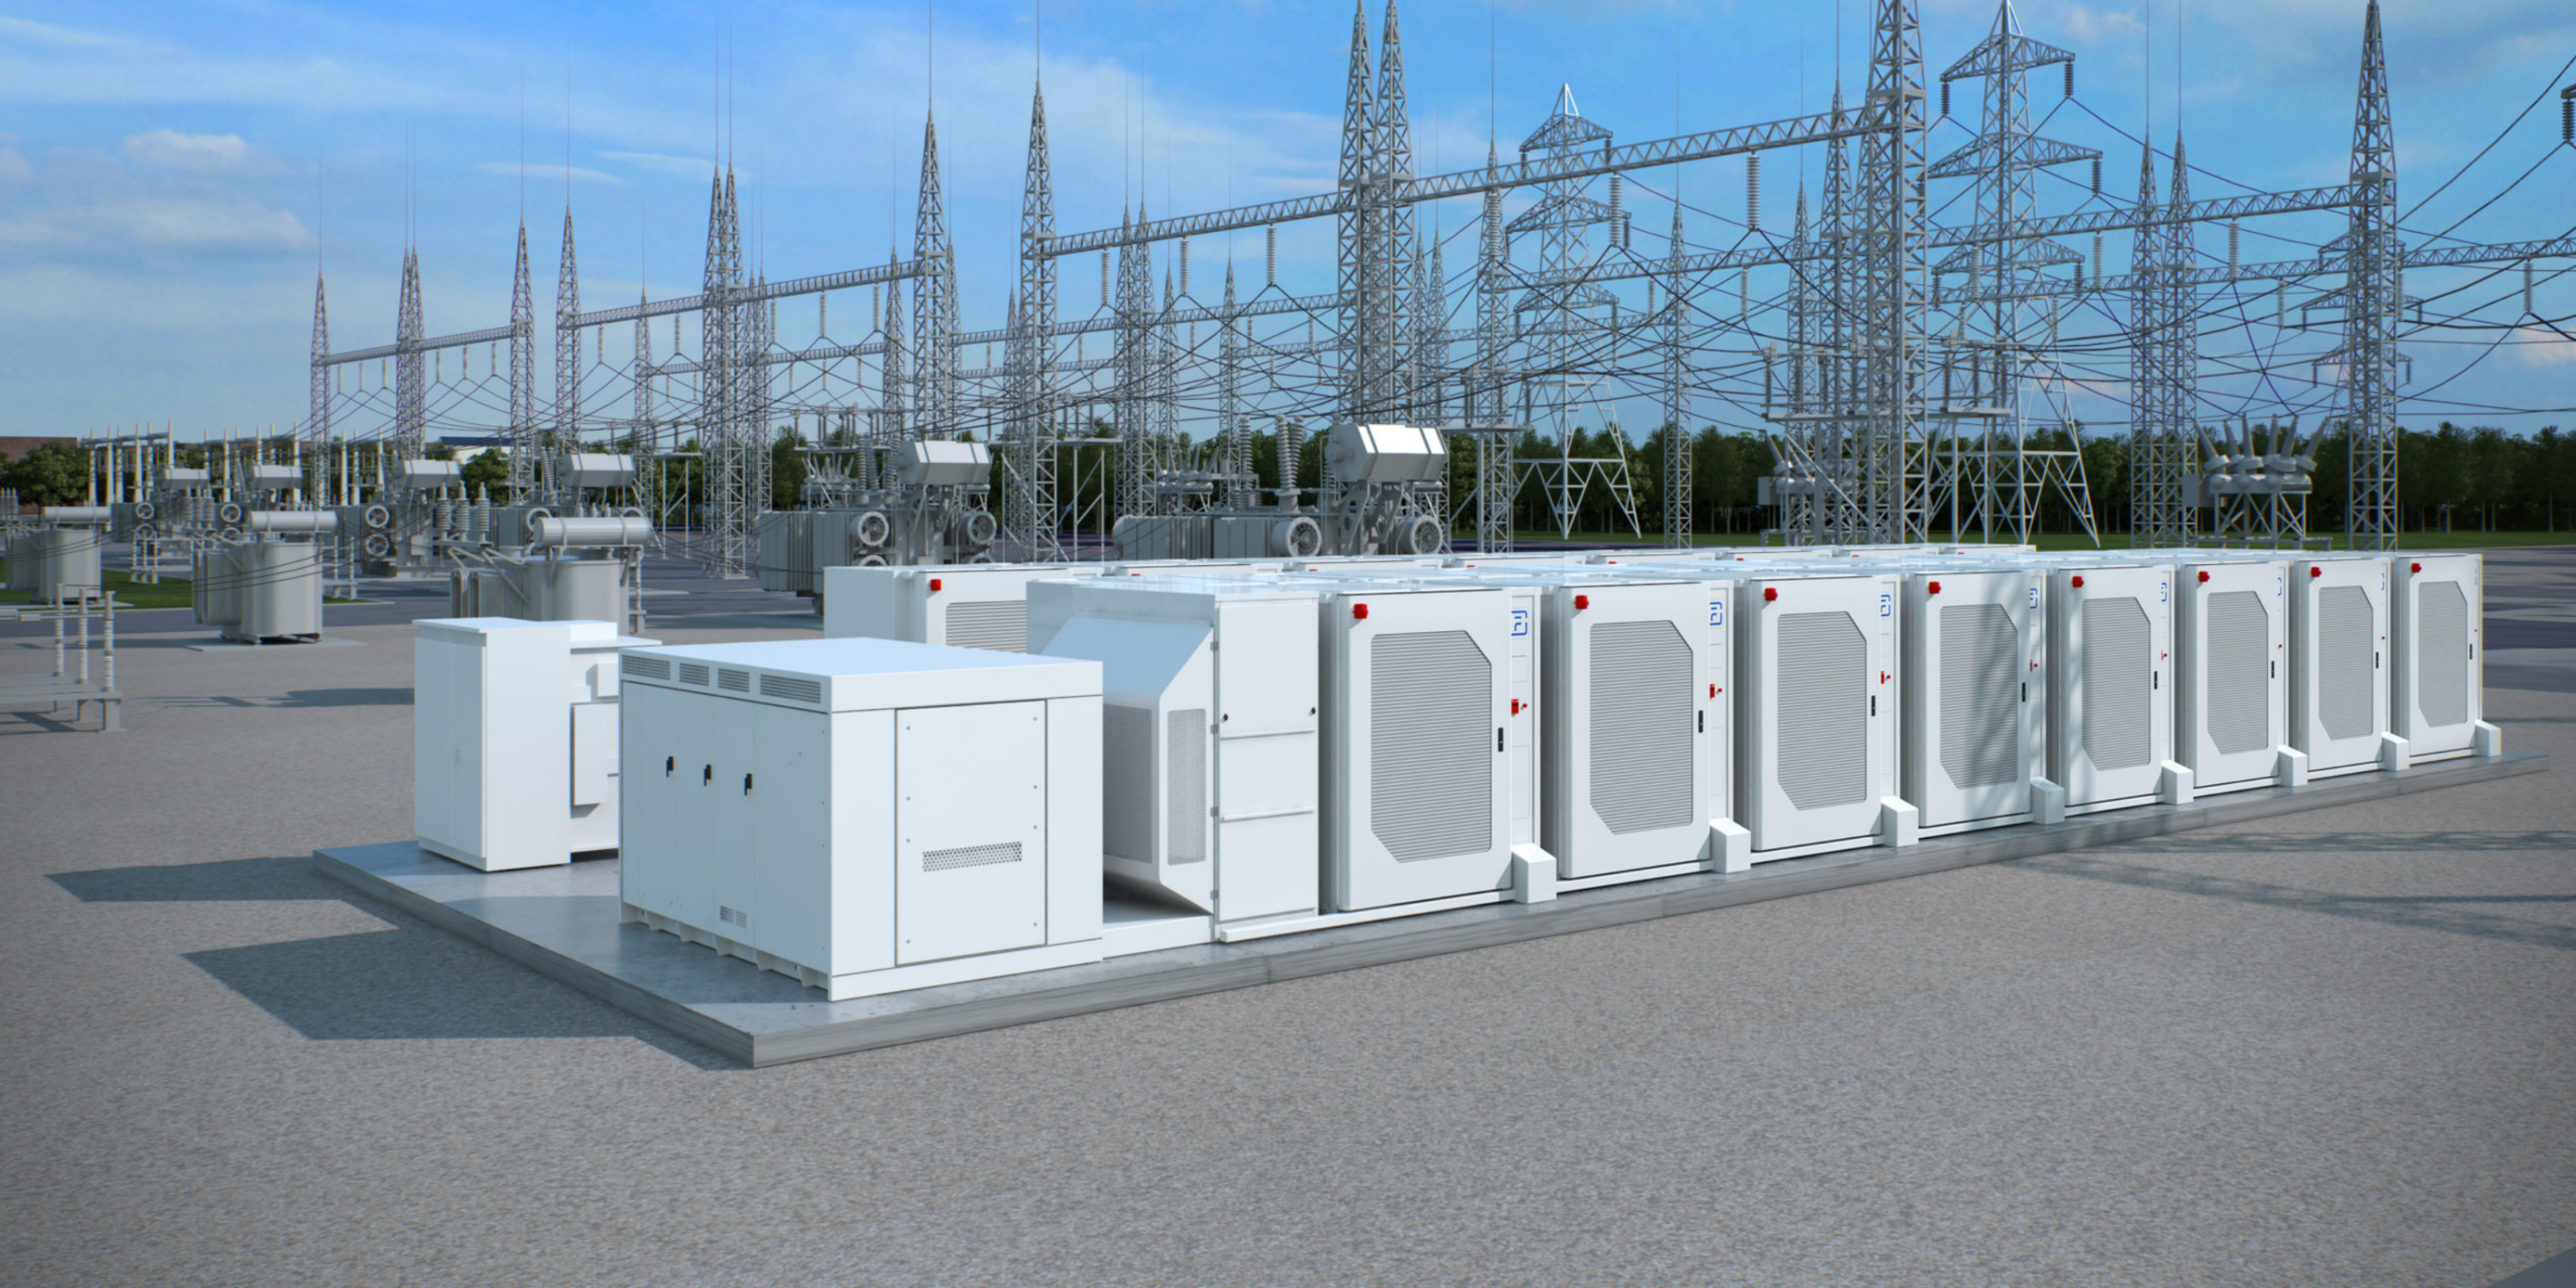 Innovative off-grid energy storage system, enabling sustainable power storage from renewable sources in remote locations.